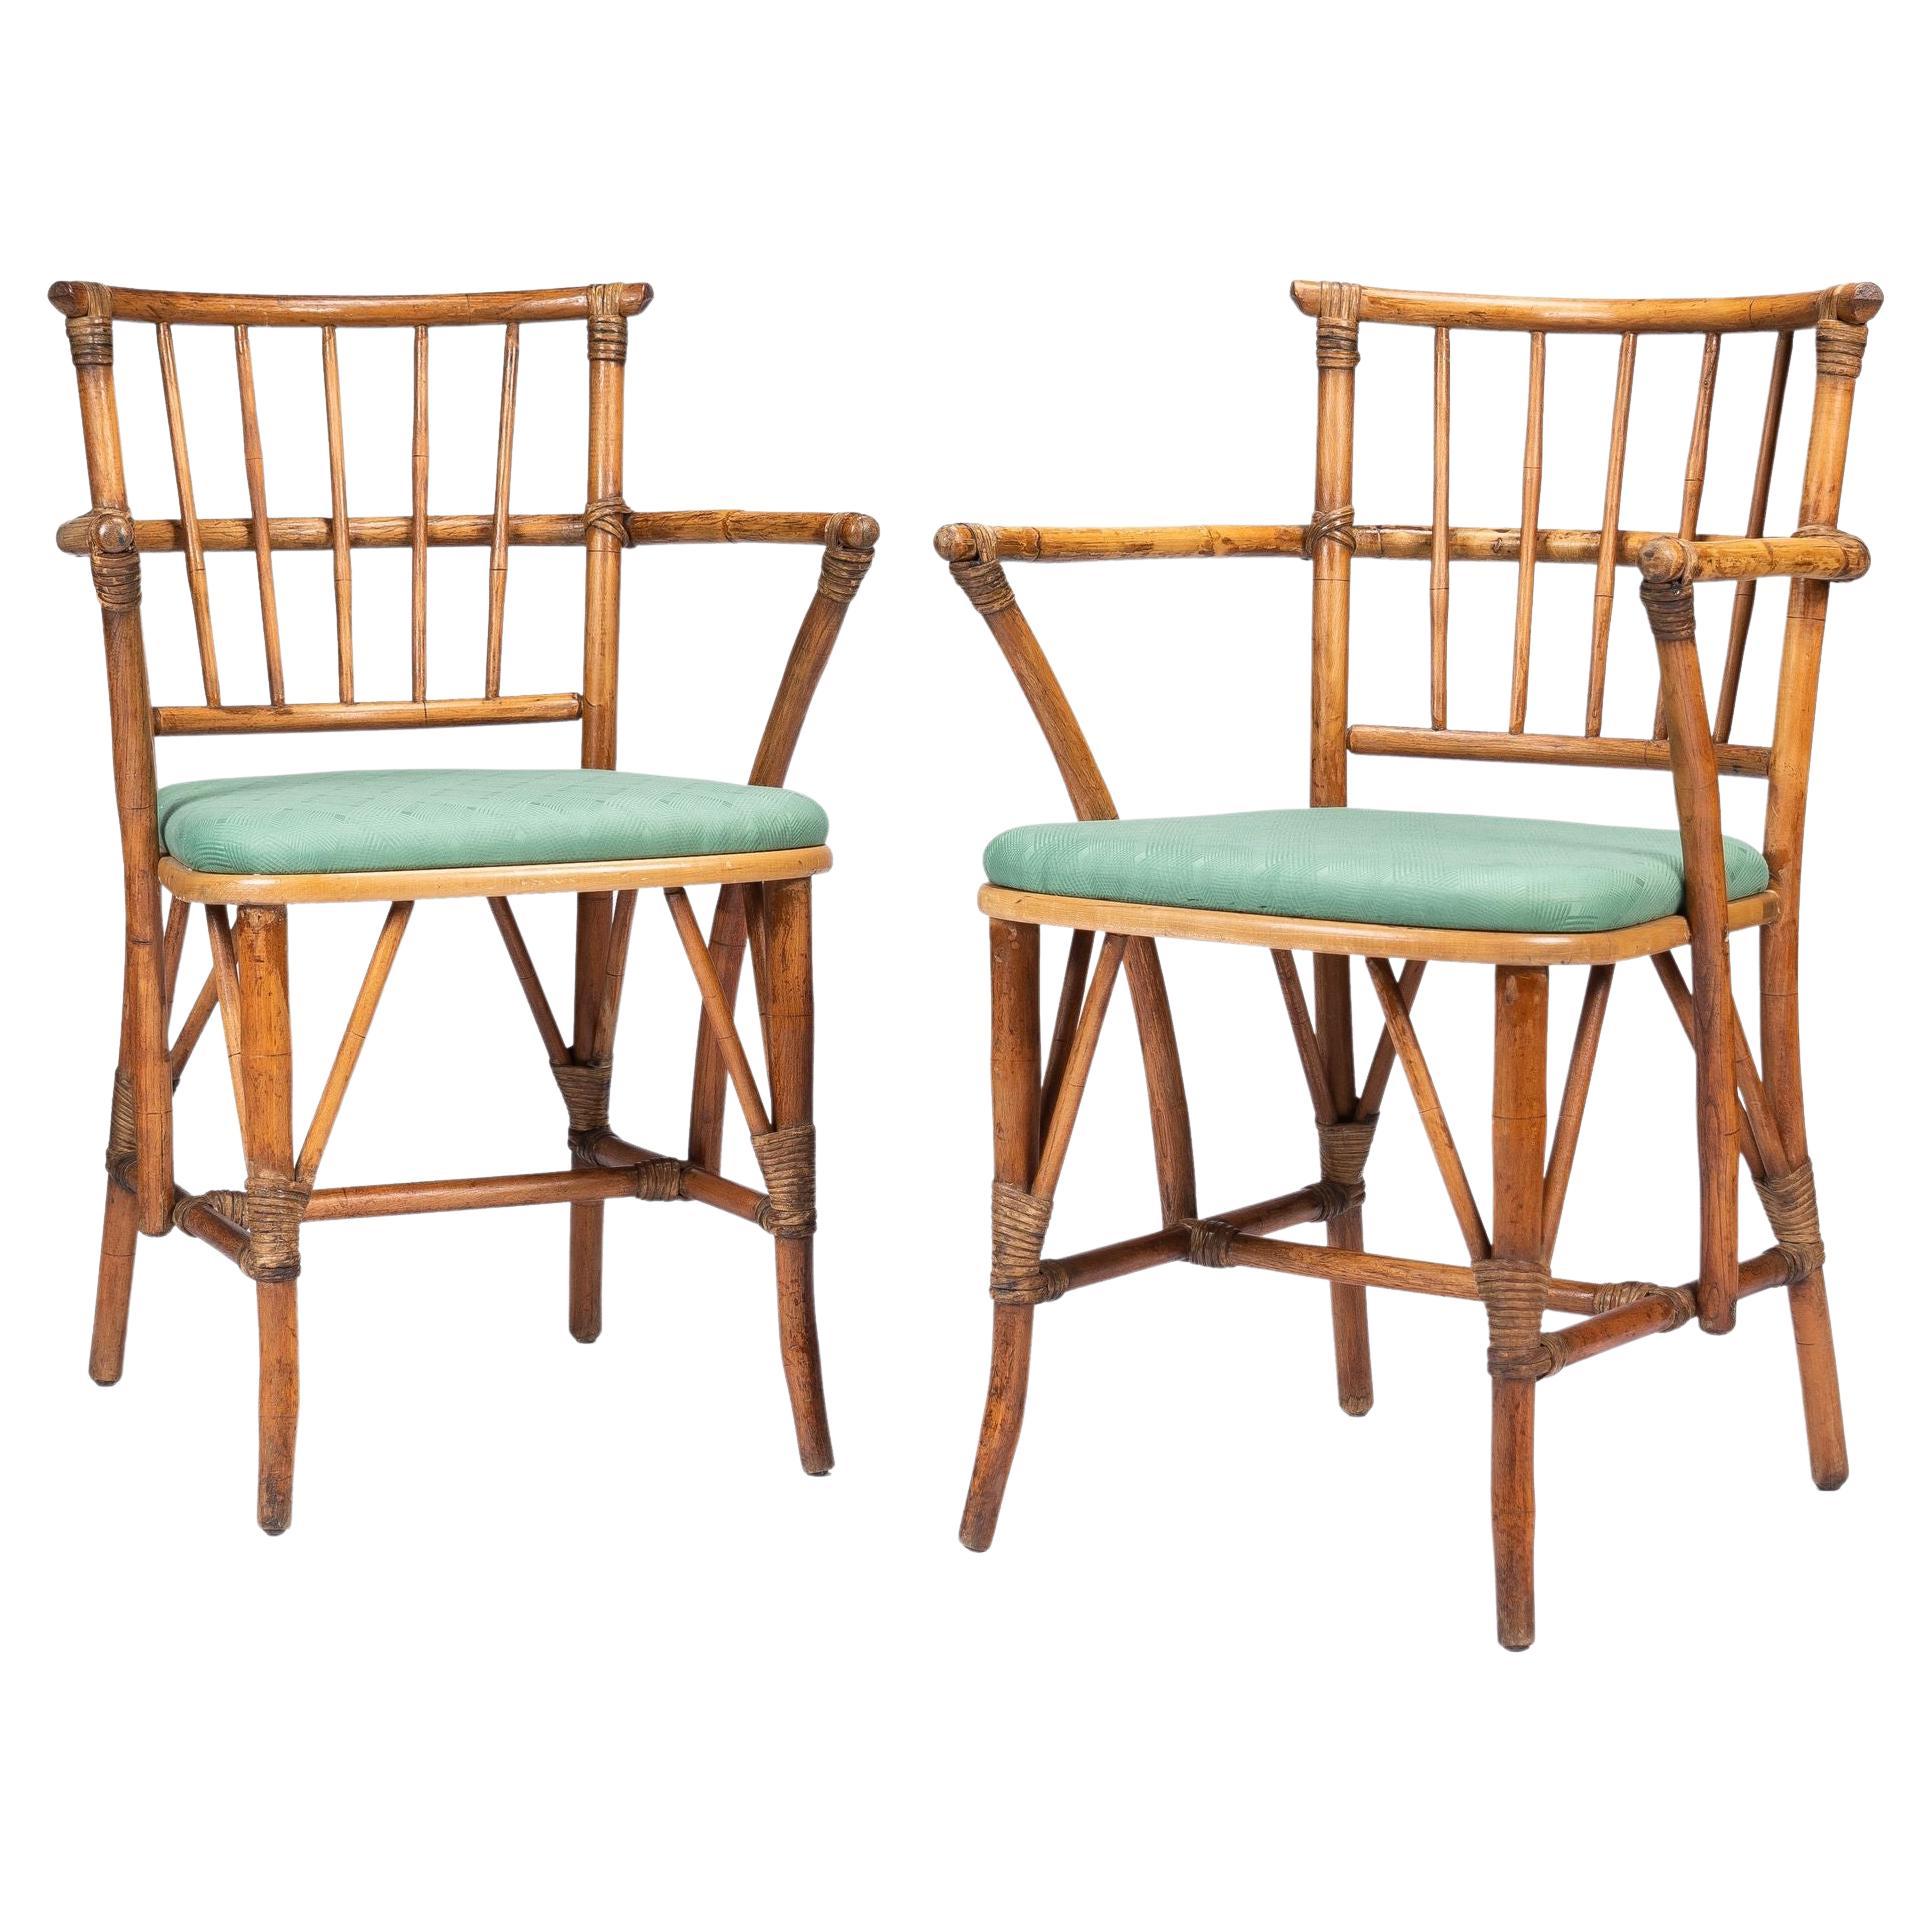 Pair of American Mid Century bamboo turned arm chairs, 1950's